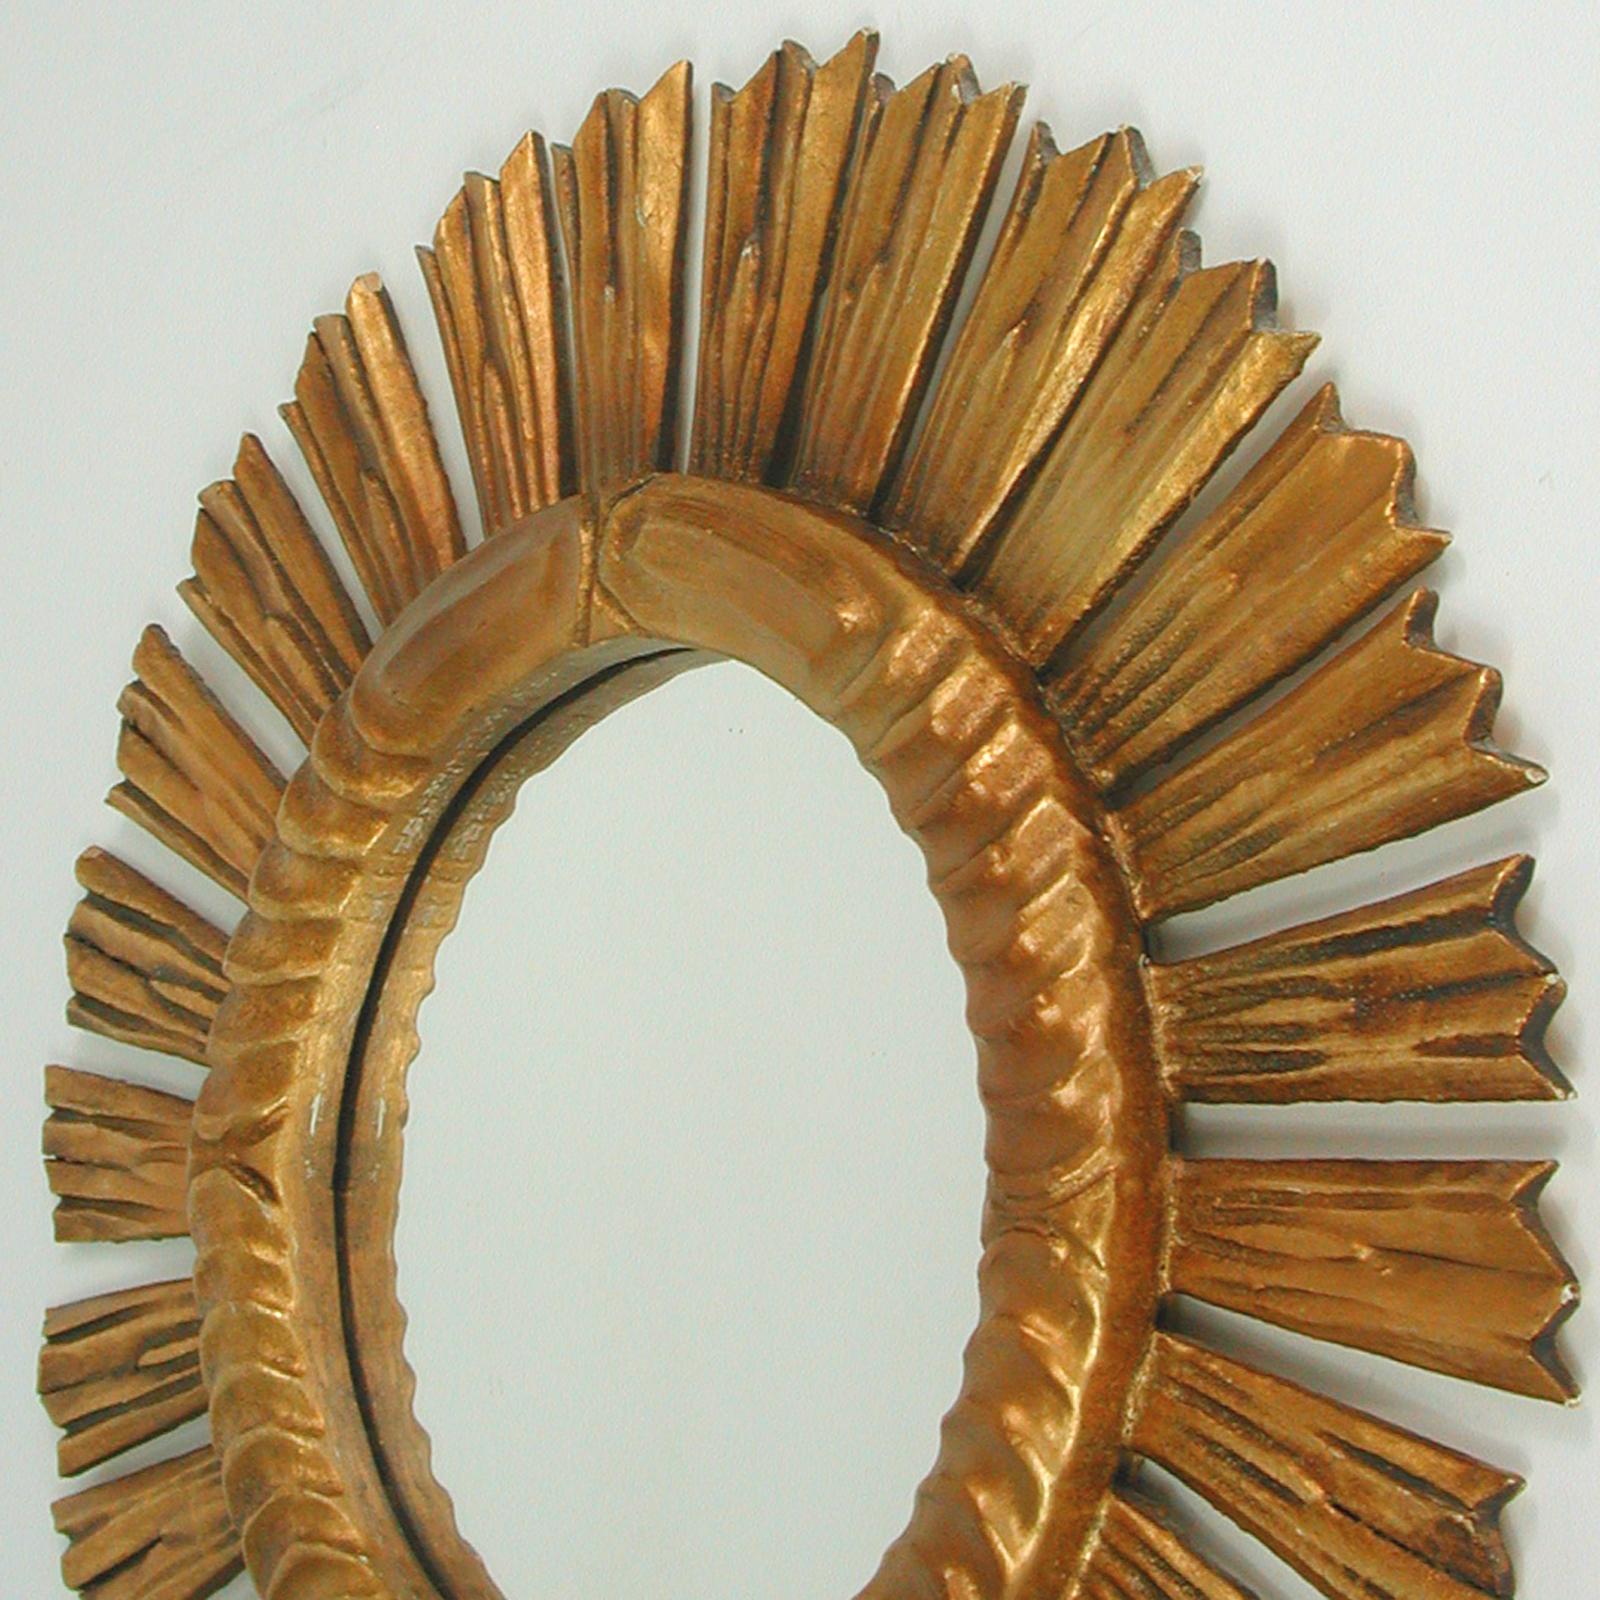 Spanish Sunburst Carved Giltwood Mirror, 1940s to 1950s For Sale 2